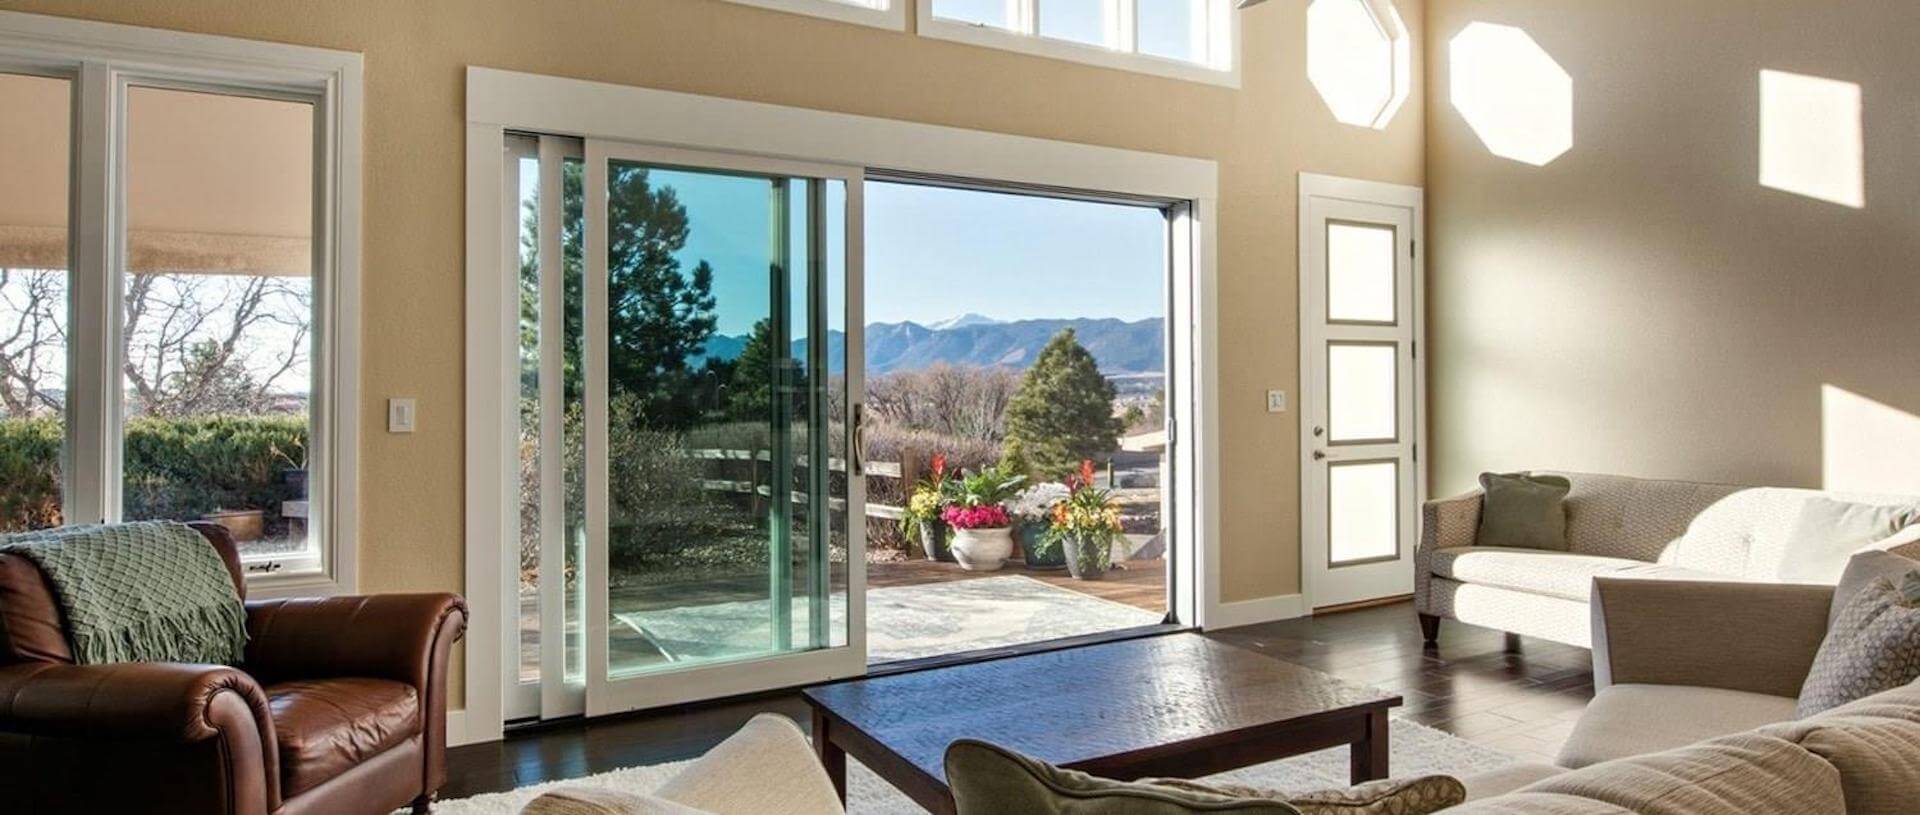 Back screen doors opens out to a porch and beautiful scenery